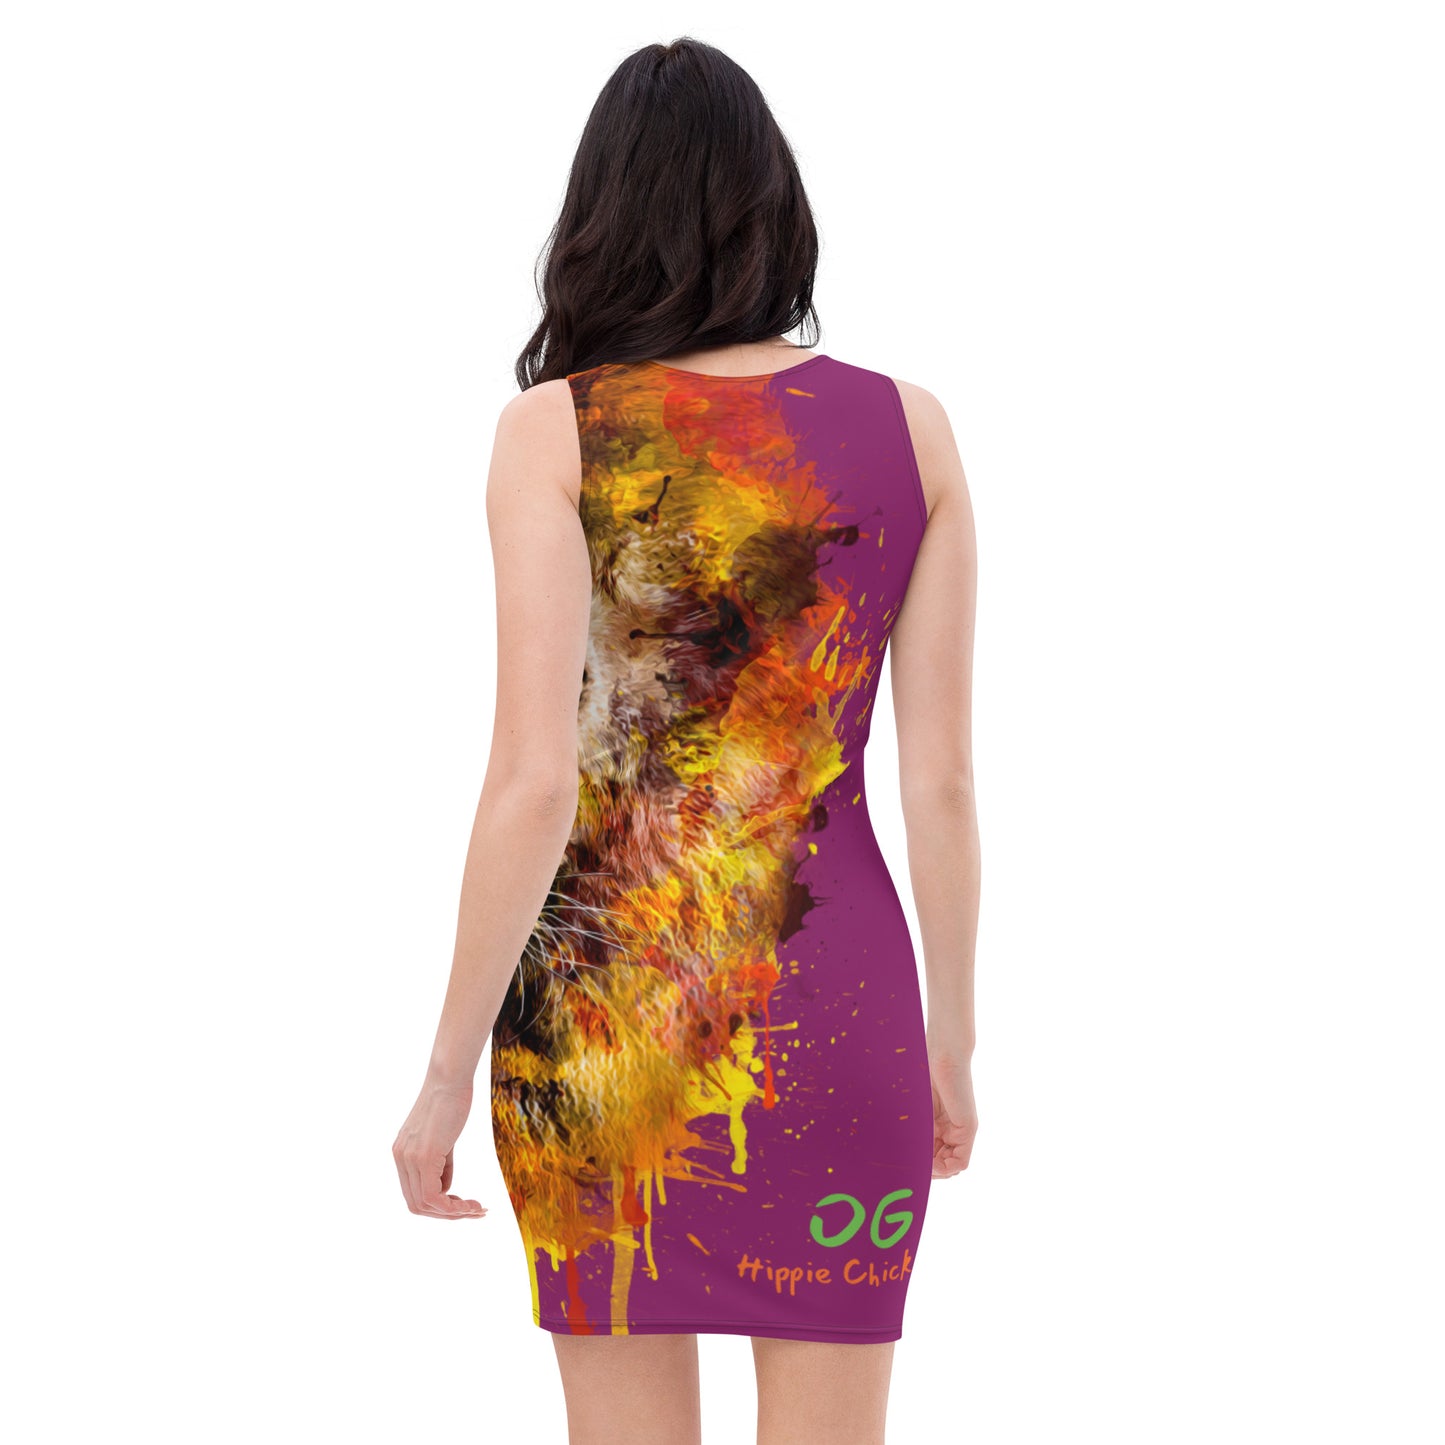 Eggplant Fitted Dress (large Lion)